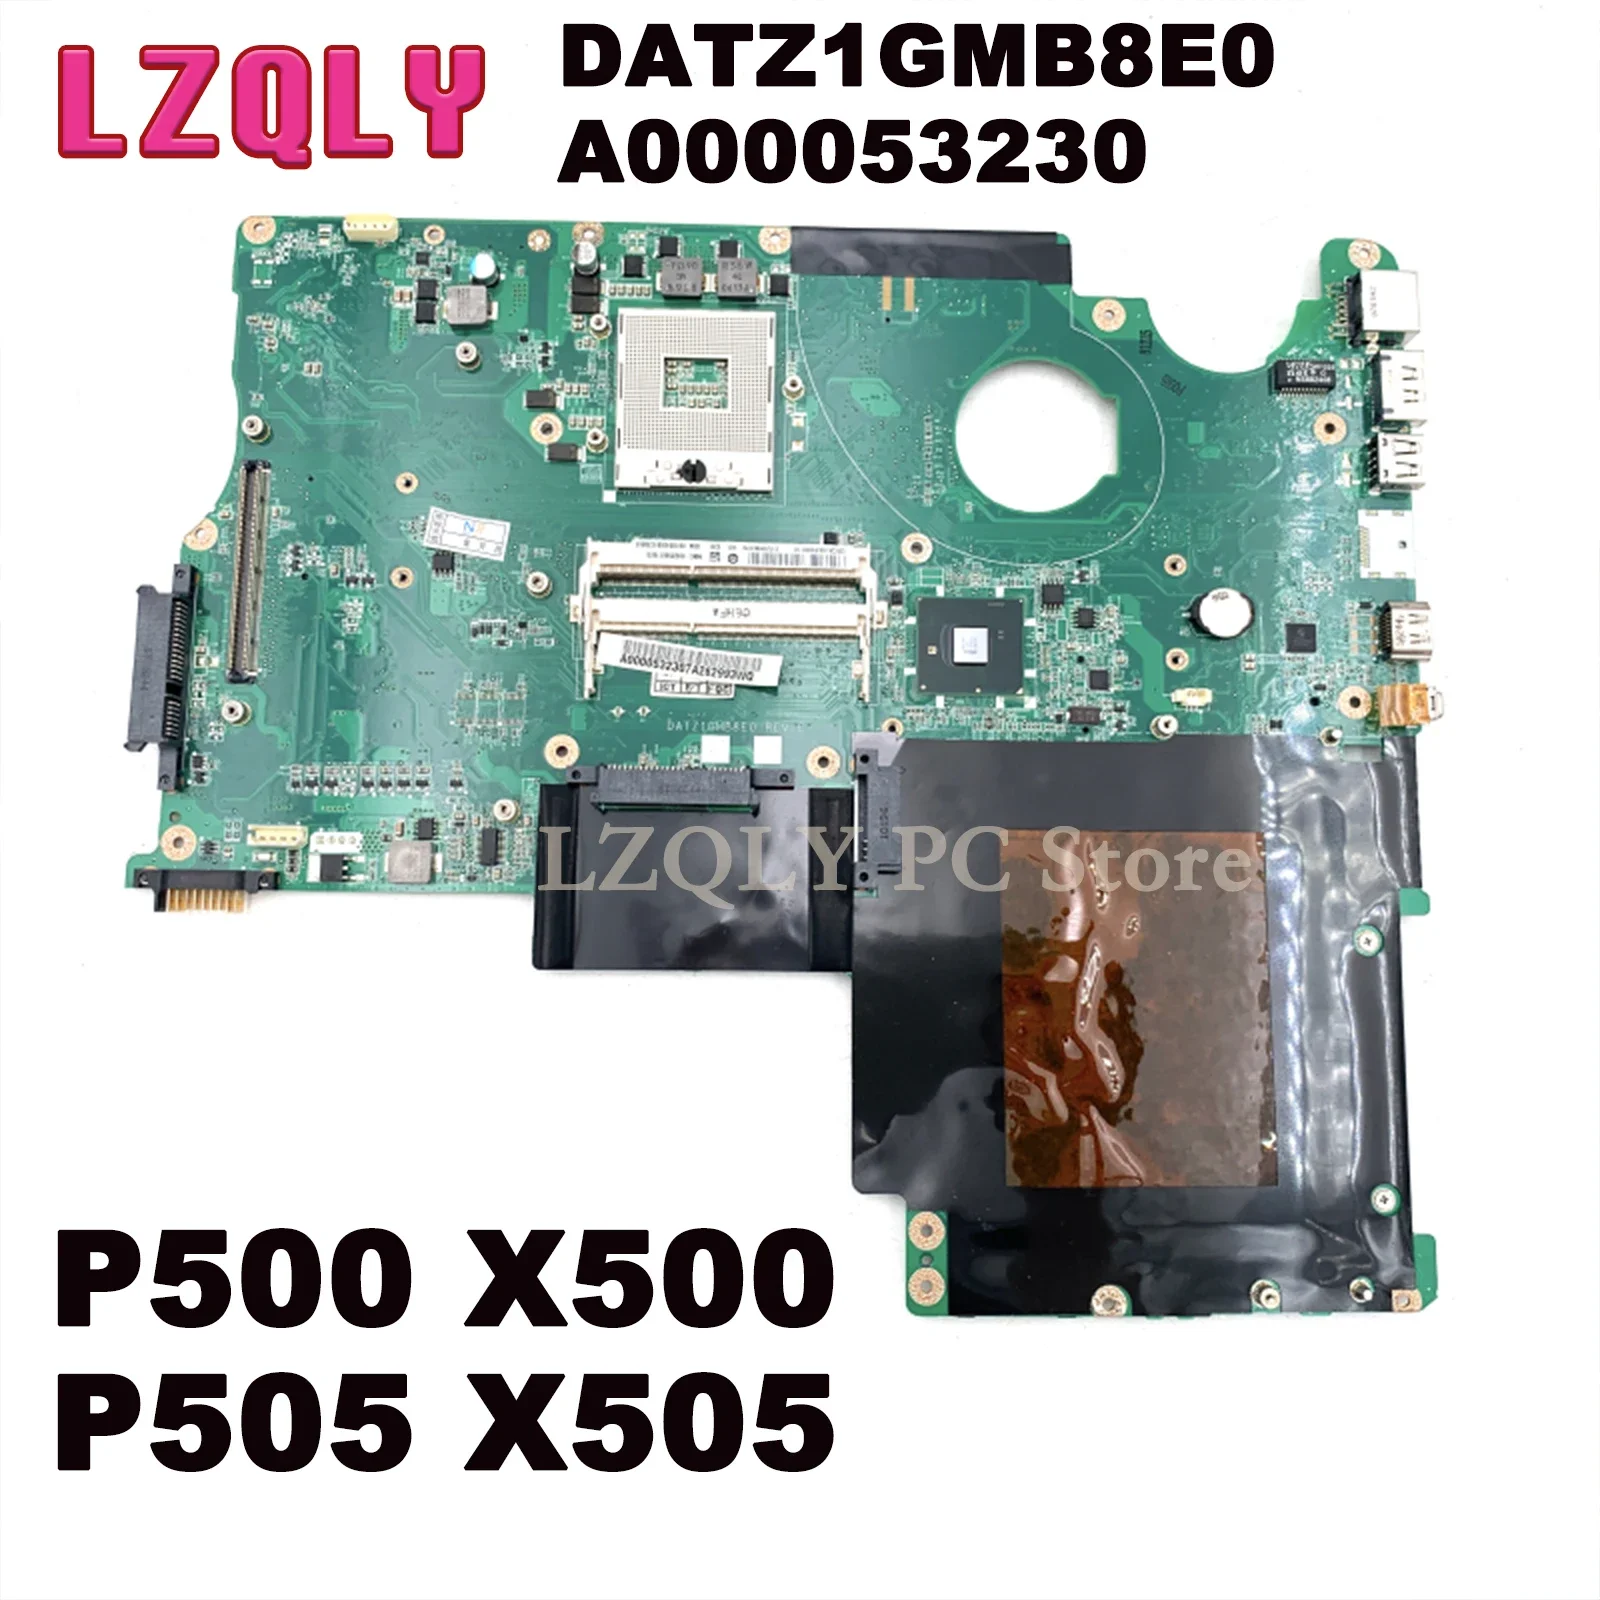 

LZQLY For Toshiba Satellite P500 X500 P505 X505 DATZ1GMB8E0 A000053230 Laptop Motherboard DDR3 With GPU Slots Main Board